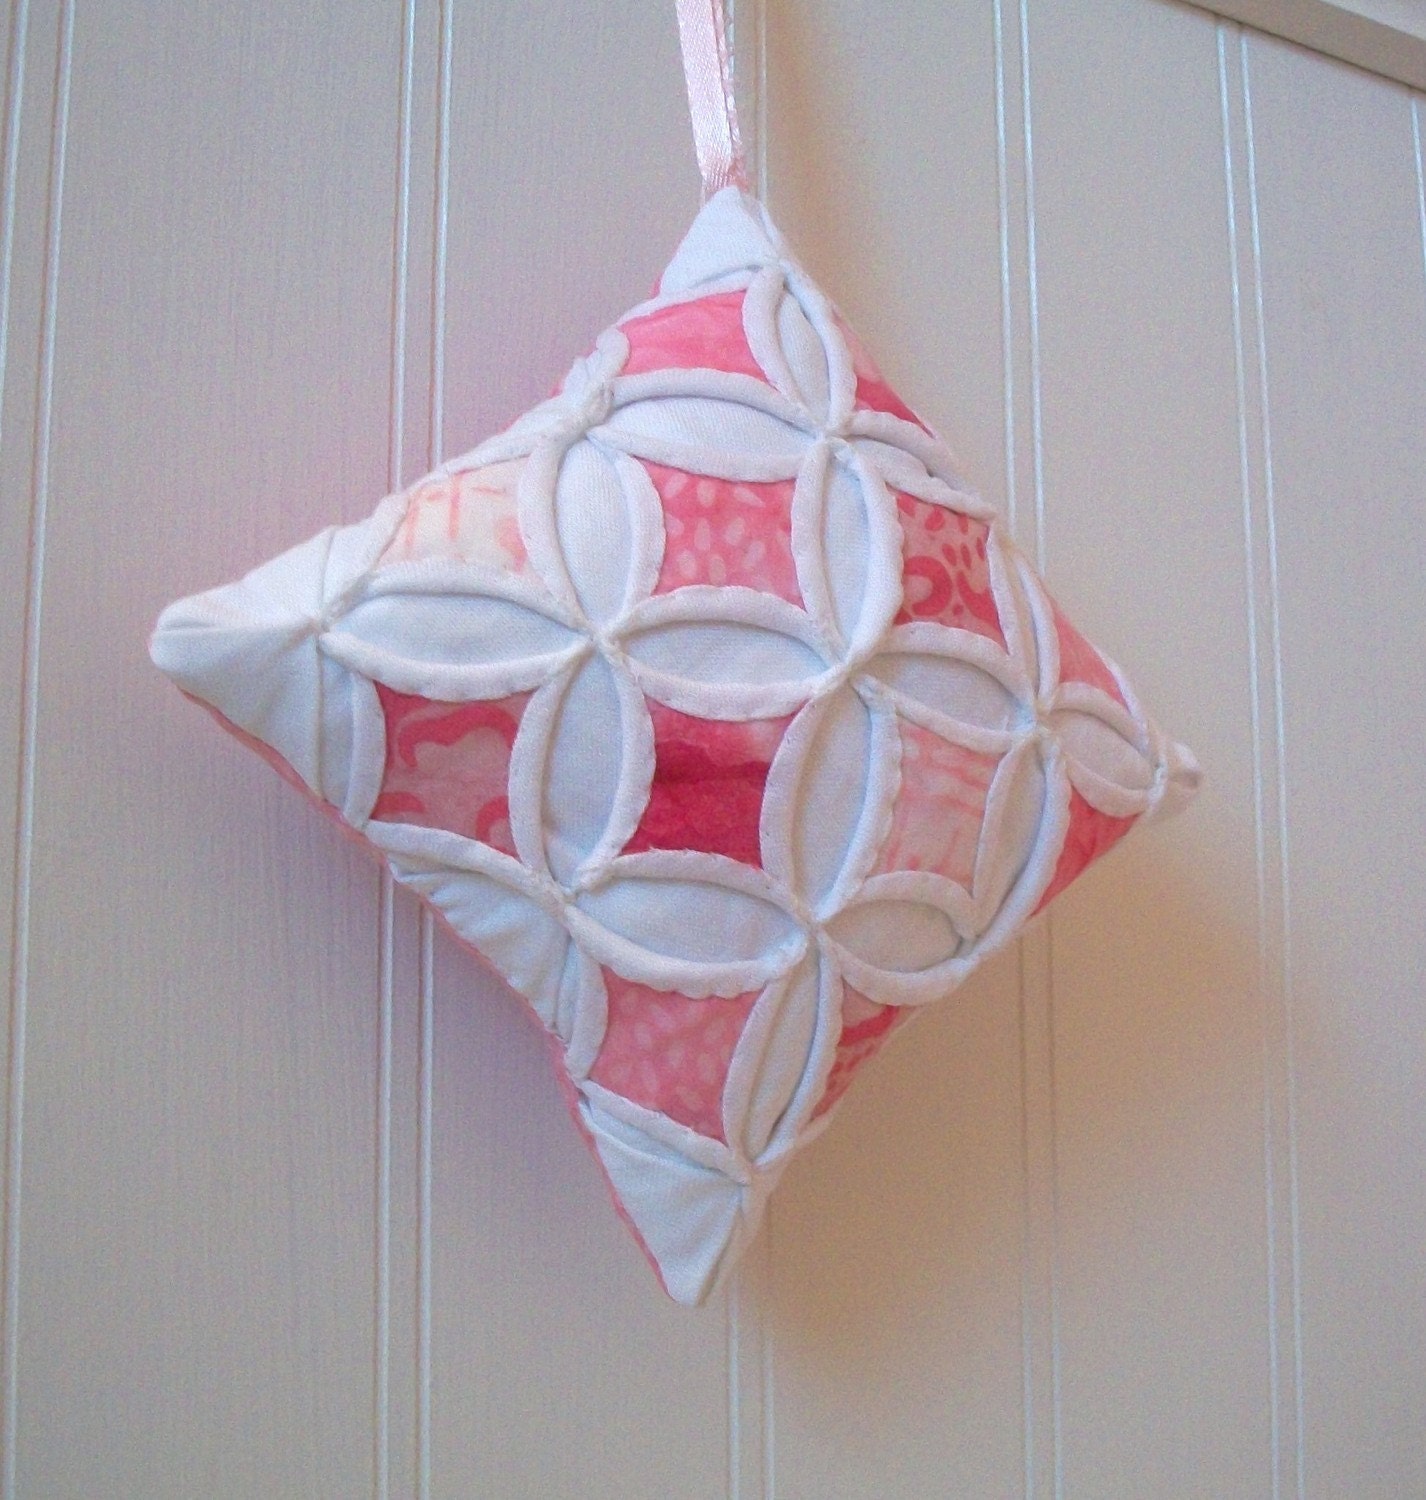 Pink Batik Miniature Cathedral Window Pillow Ornament - 4 Inches